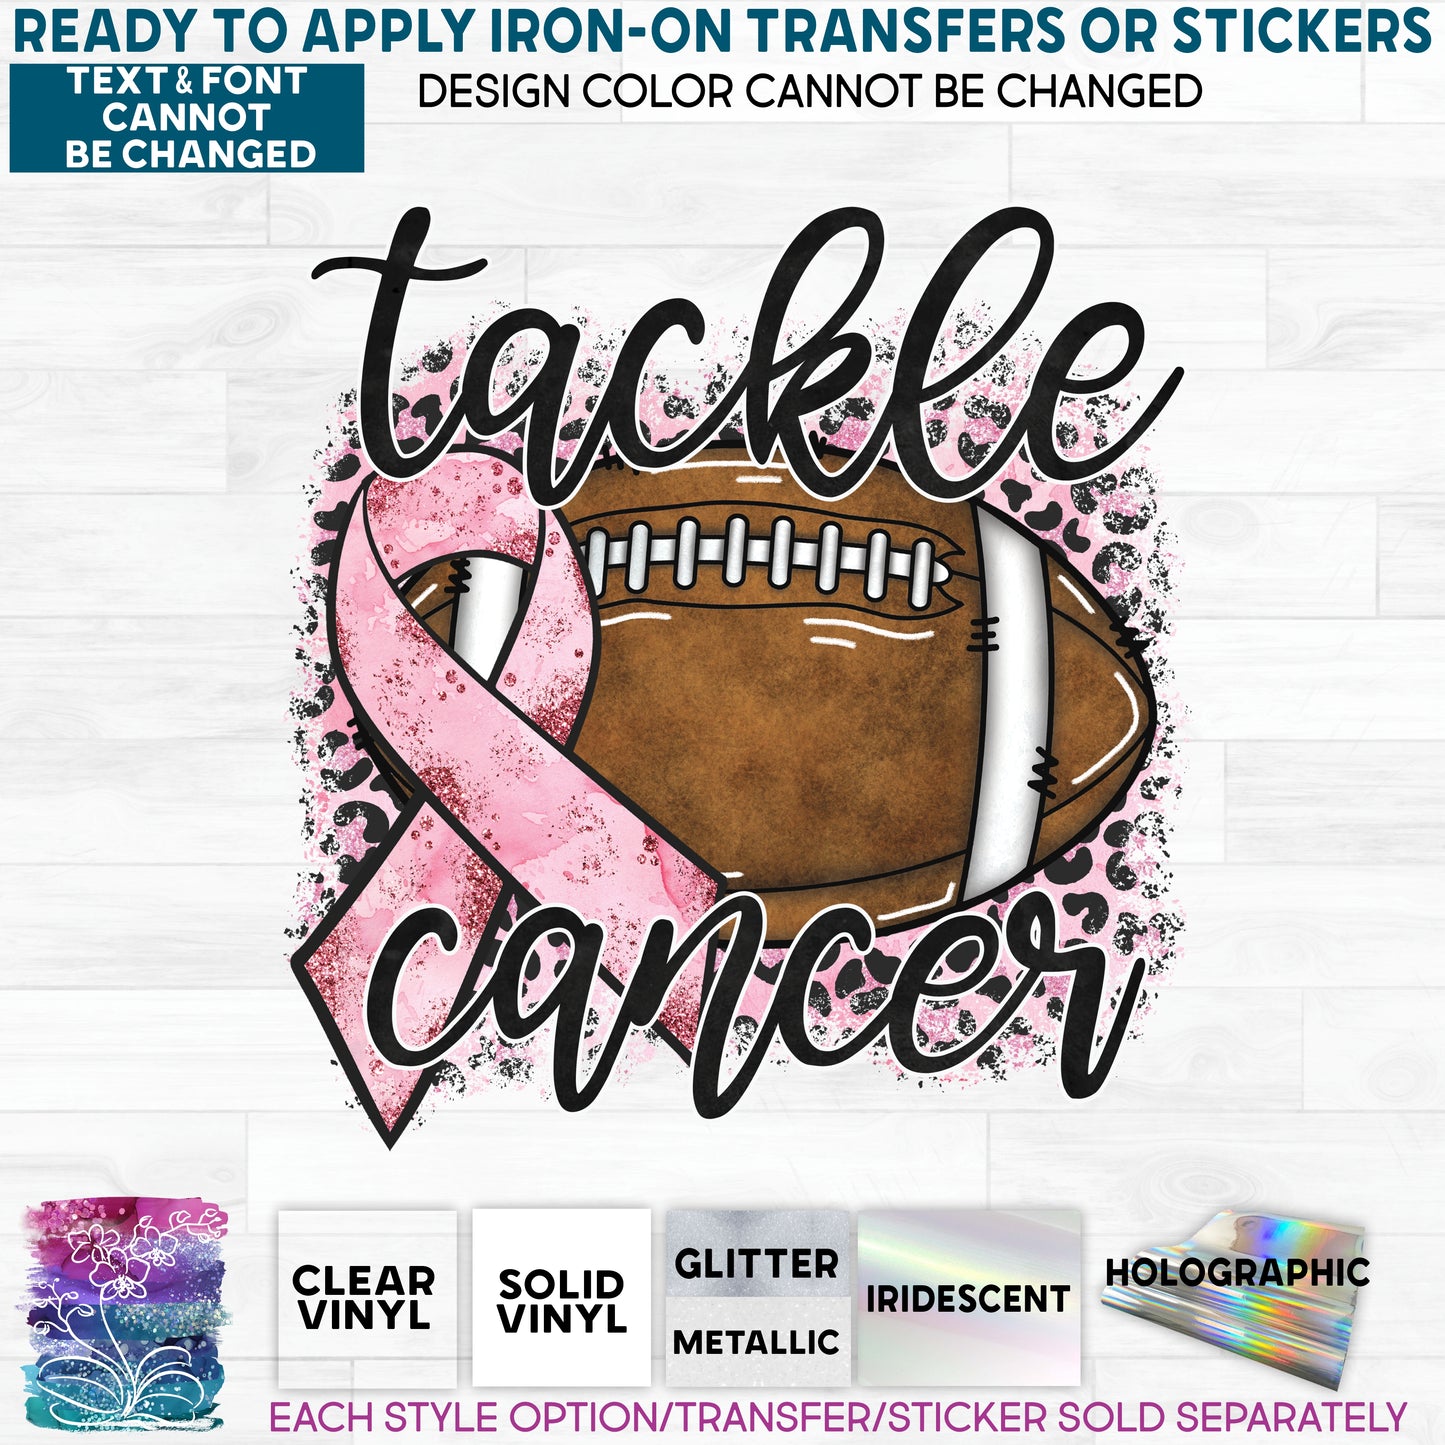 (s082-3C) Tackle Cancer Support Awareness Glitter or Vinyl Iron-On Transfer or Sticker